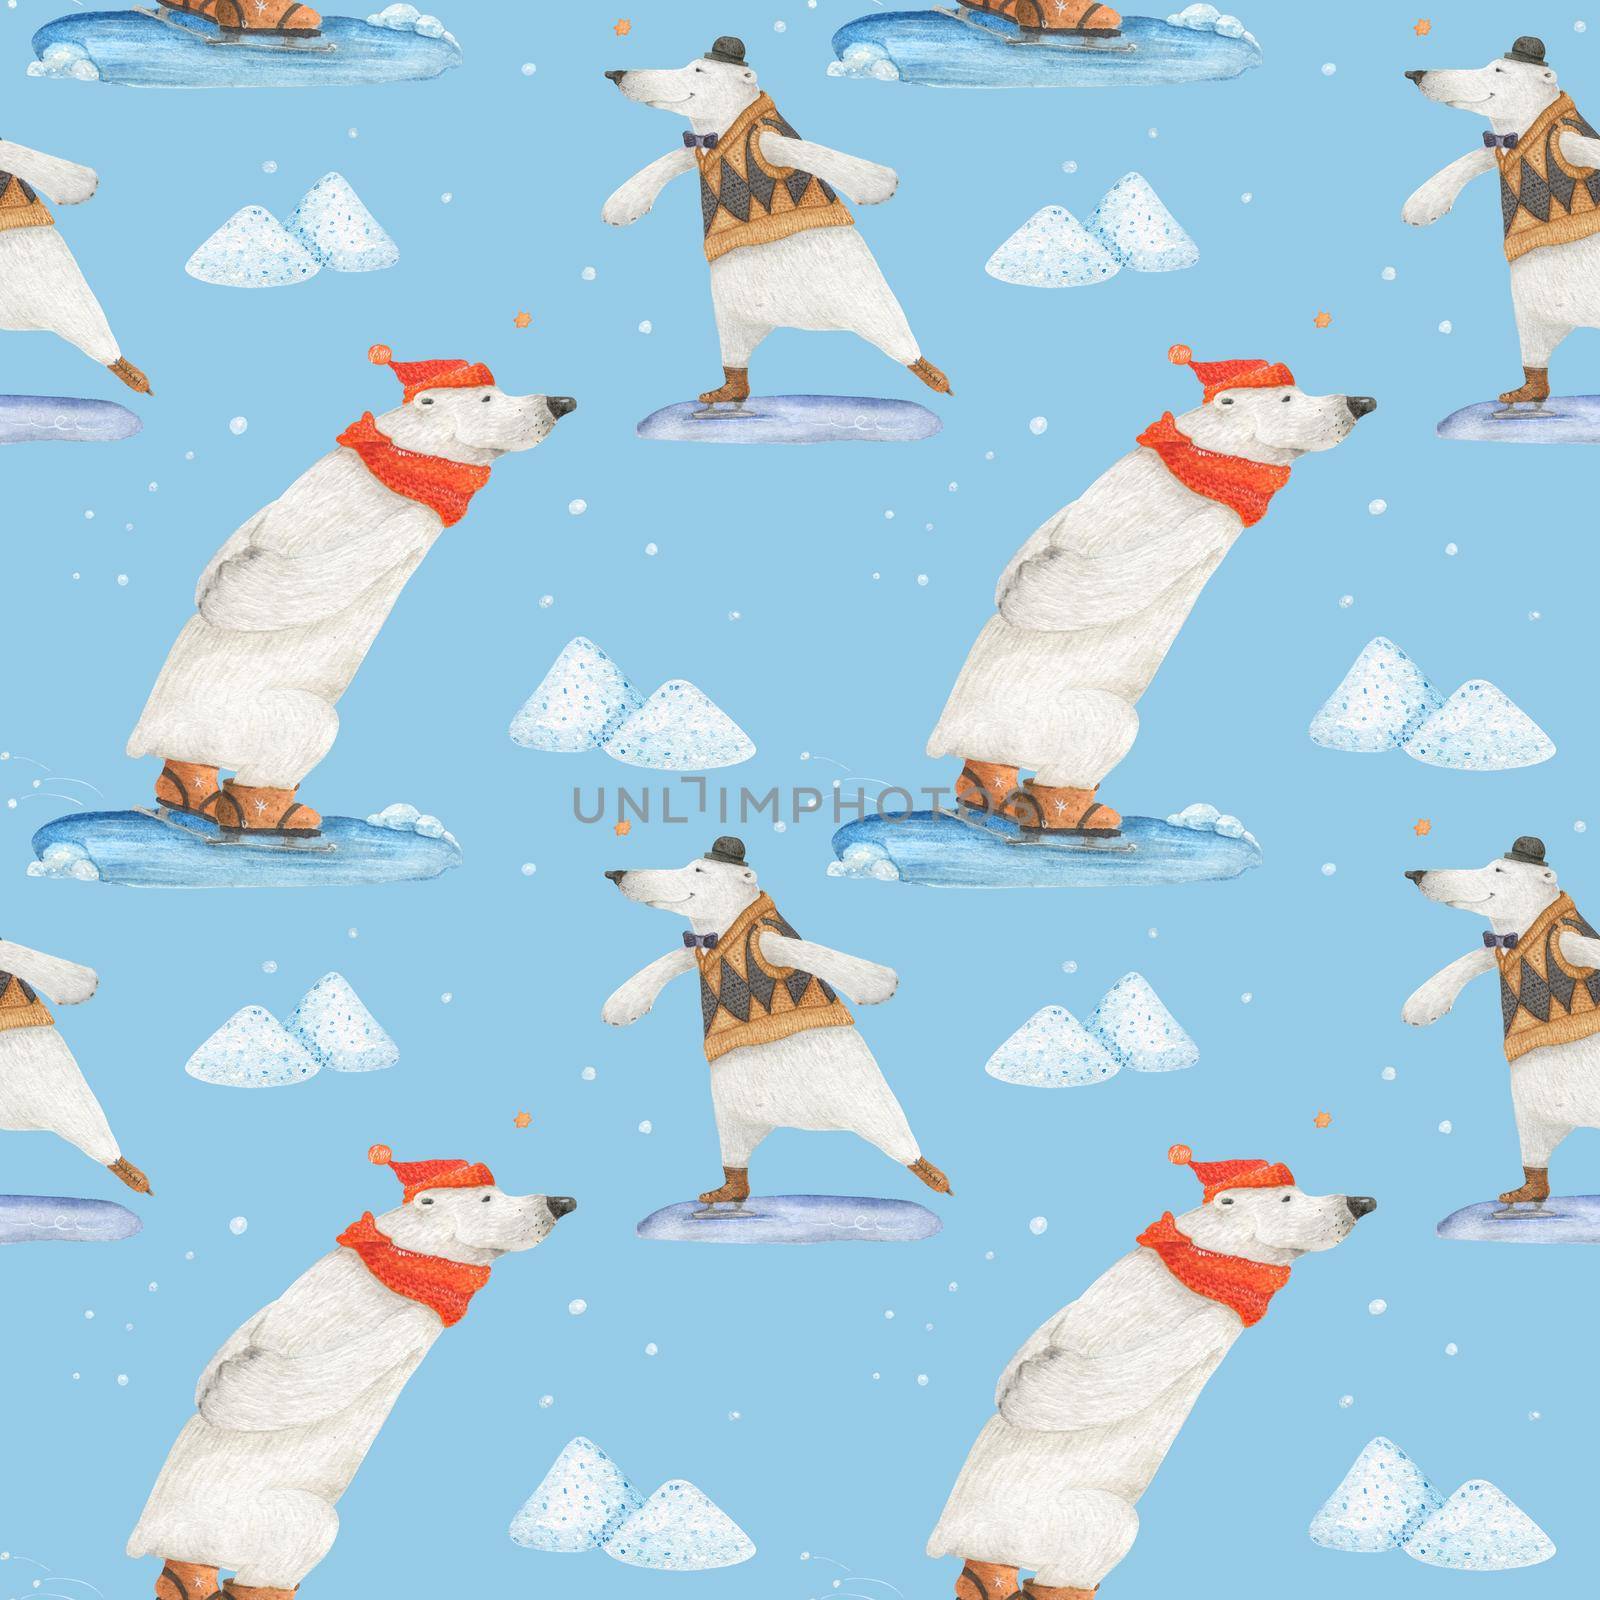 Polar bear winter fun. Arctic bears skate. Watercolor seamless patterns for textile, wrapping paper and any tiled design. Blue background, clipping path uncluded